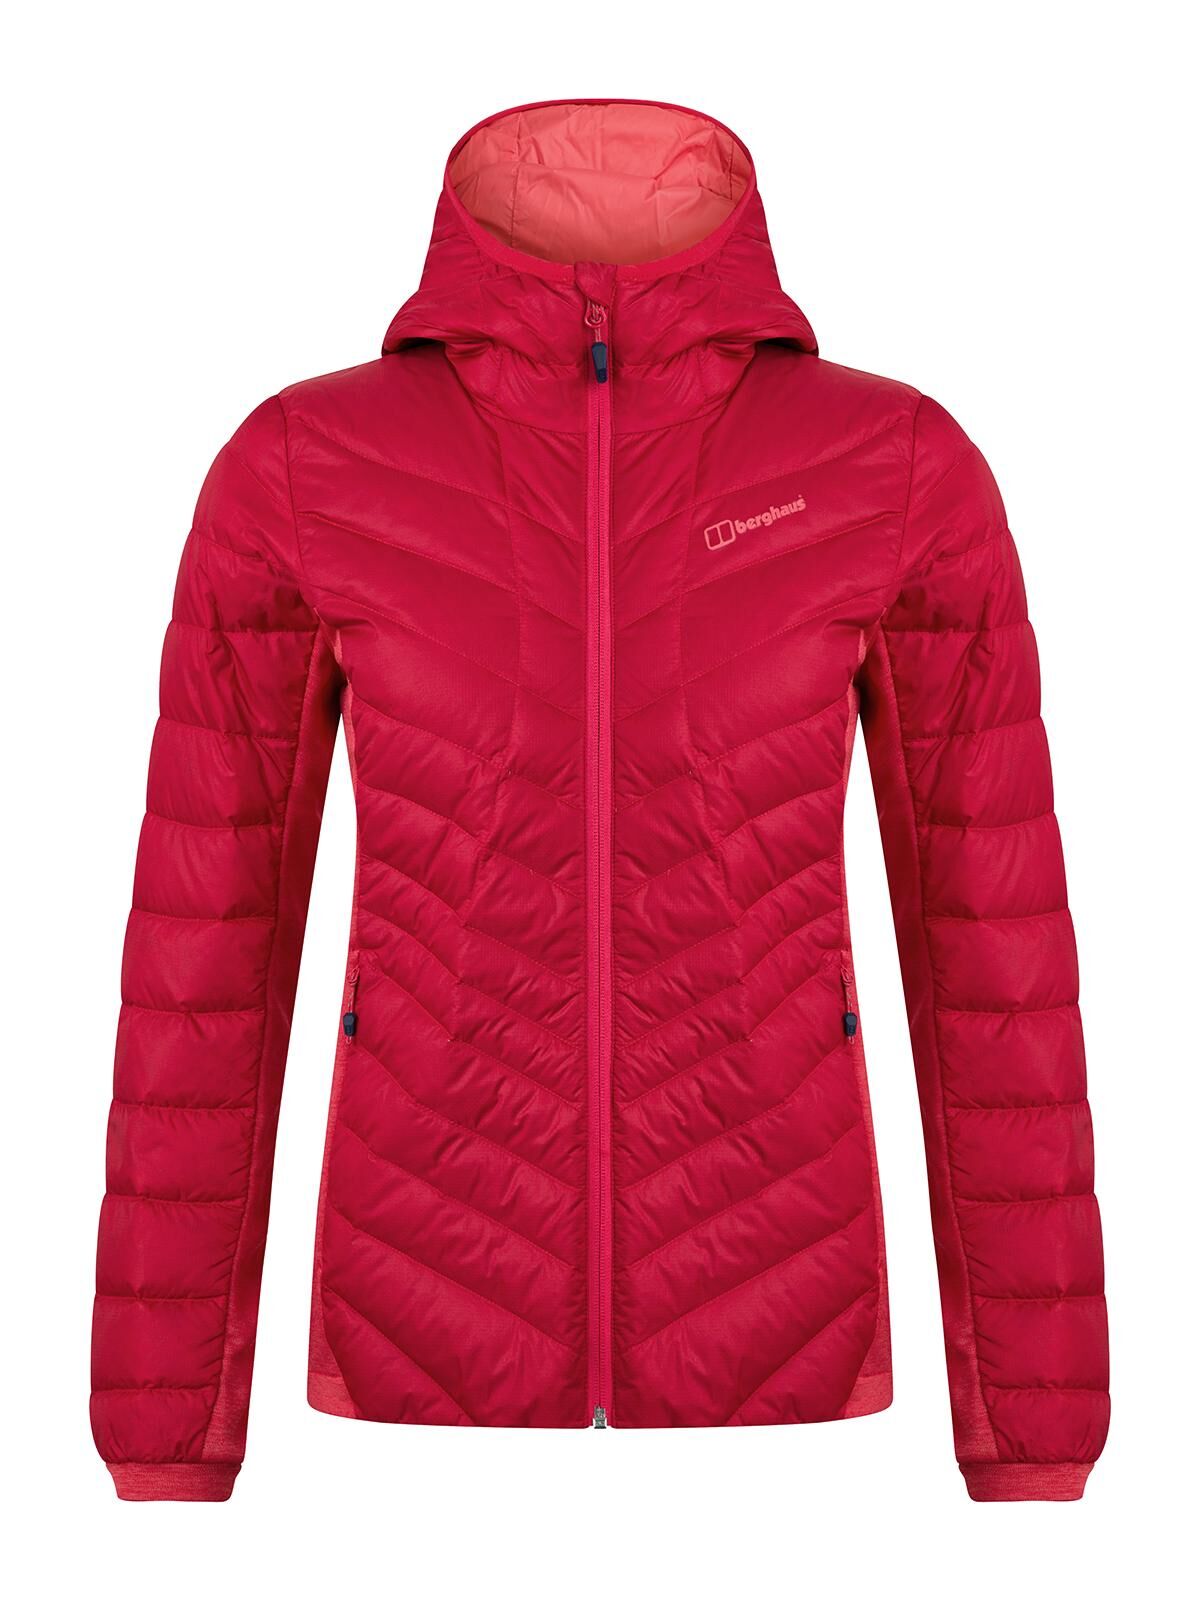 Berghaus Tephra Stretch Reflect Down Insulated Jacket - Giacca in piumino - Donna